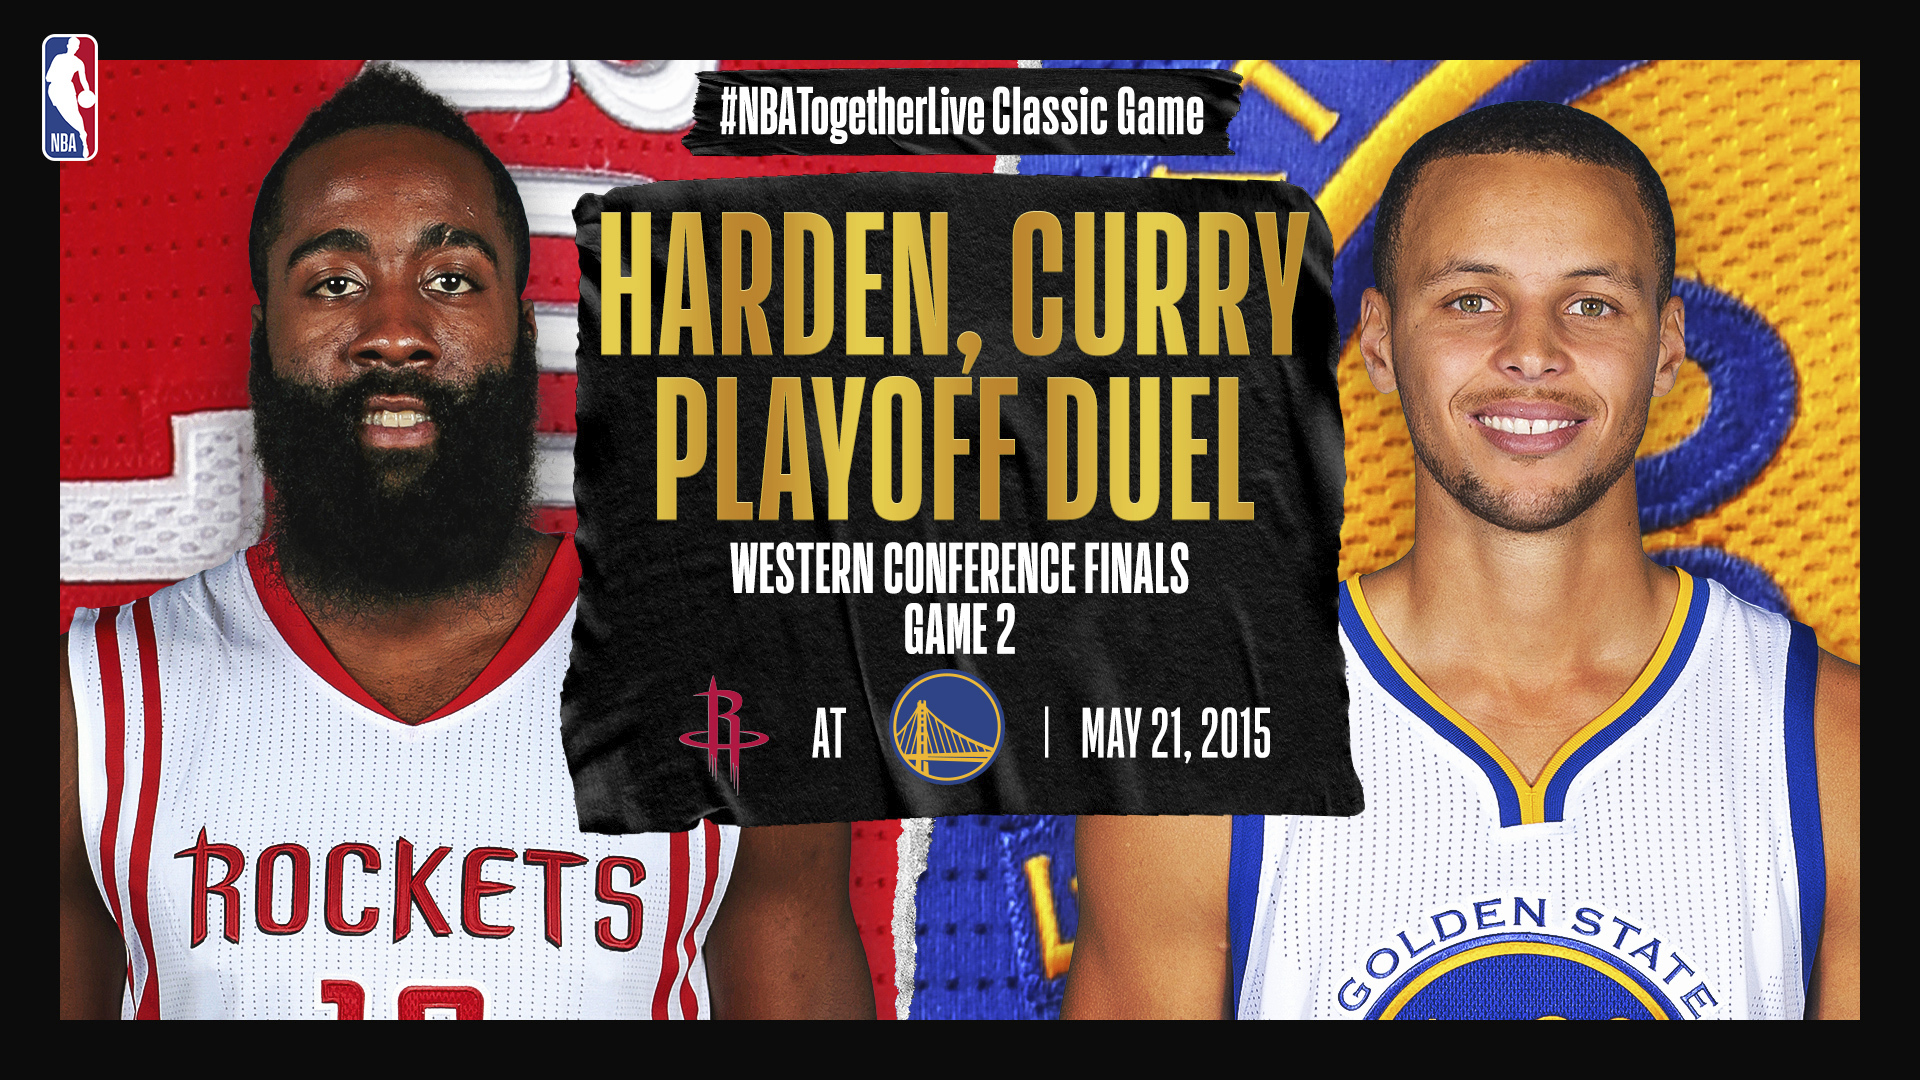 Nbatogetherlive League Mvp Stephen Curry And Runner Up James Harden Duel In Game 2 Of The 2015 Western Conference Finals Nba Com Australia The Official Site Of The Nba